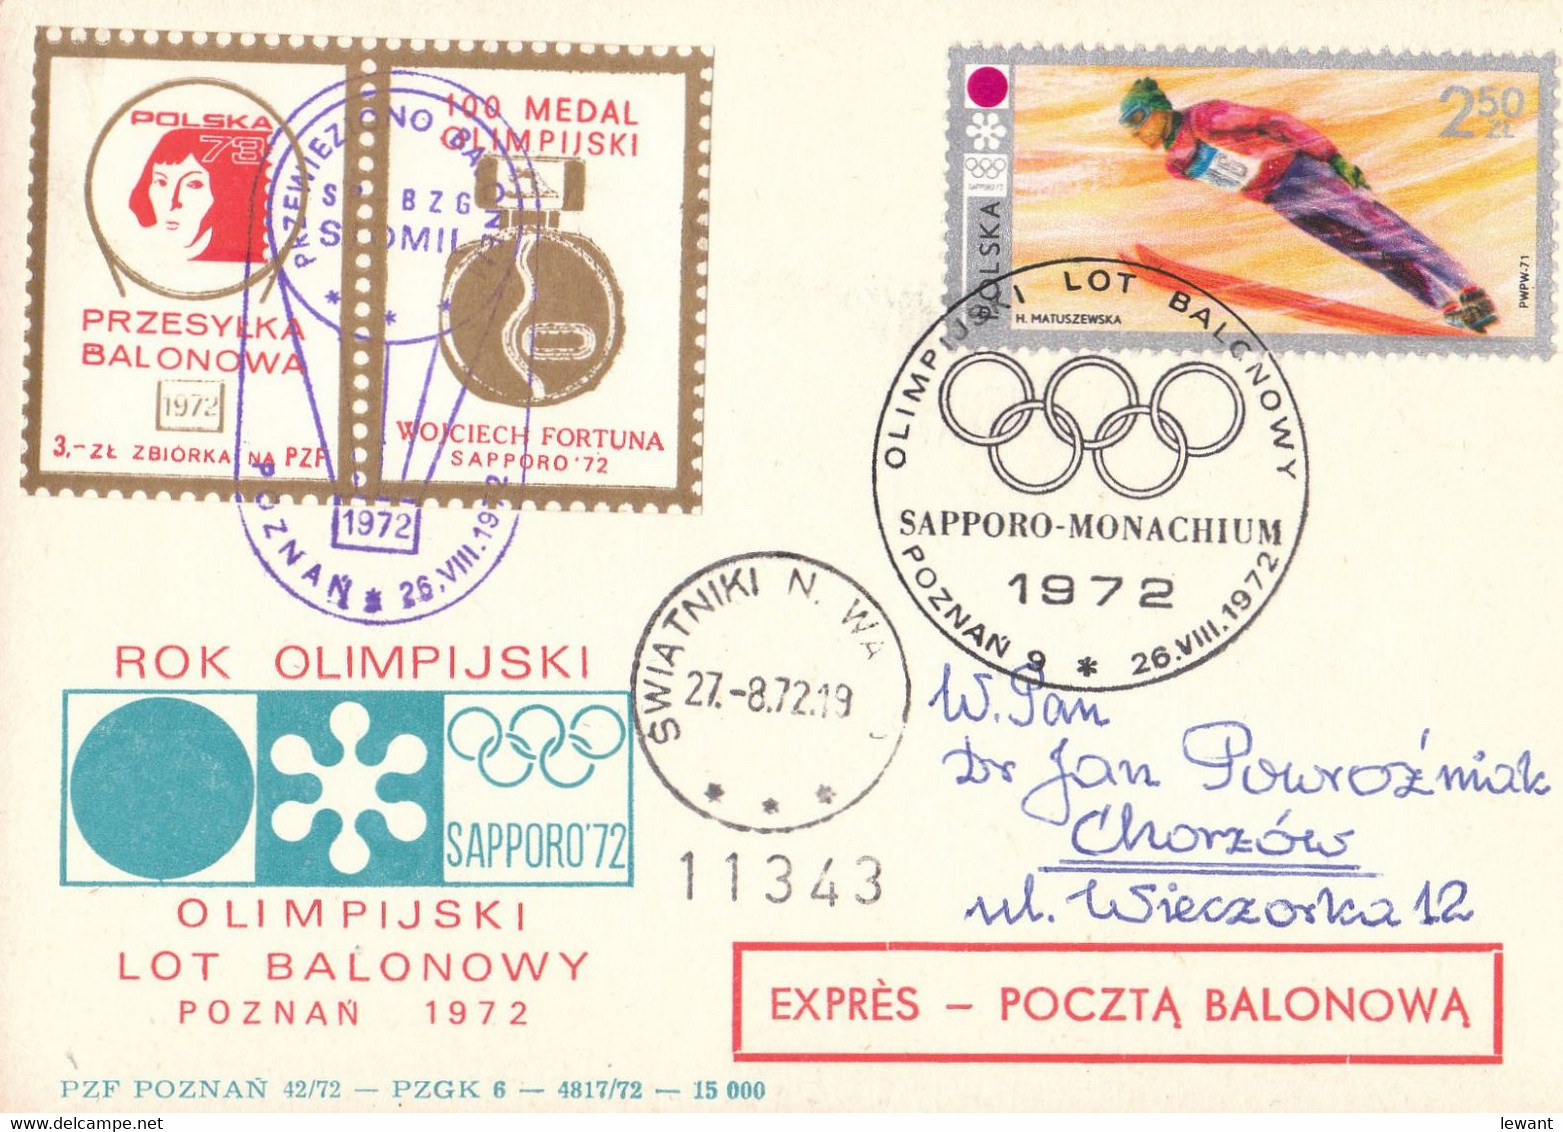 1972 ''STOMIL'' Postal Balloon With A Special Date Stamp For The Olympic Games In Sapporo And Munich (11343) POWR - Ballons